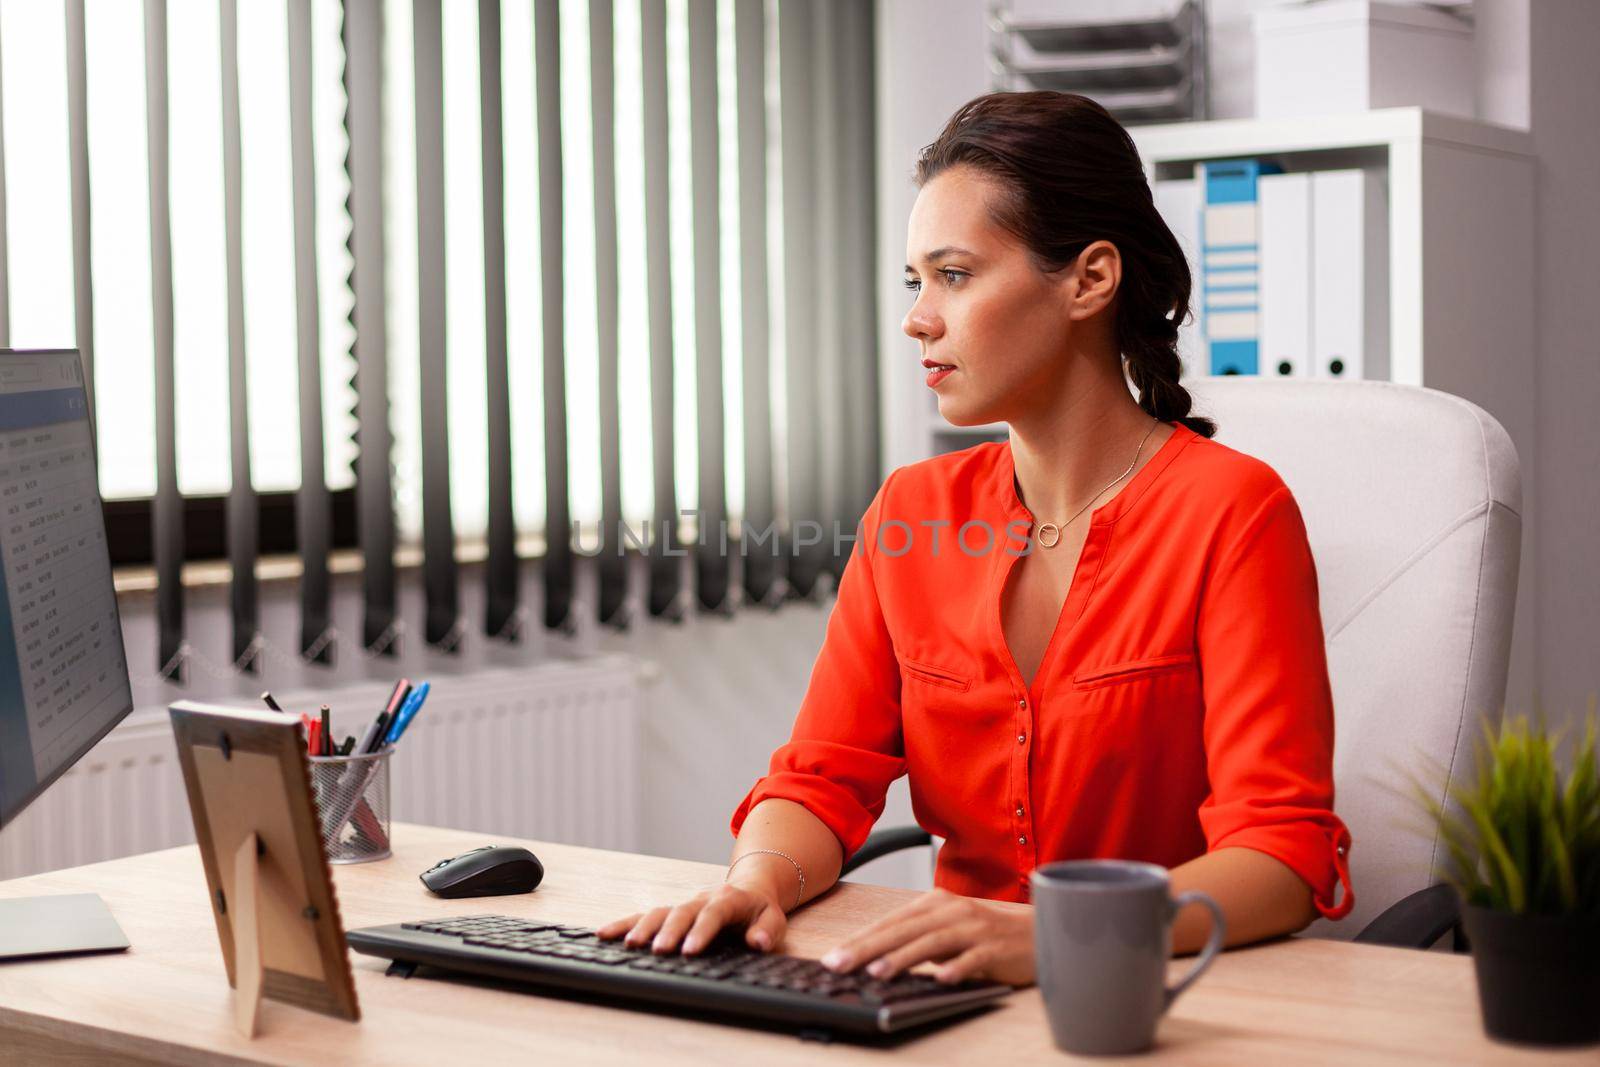 Executive businesswoman in workplace office working on finance corporate project. Successful concentrated employer with busy carreer sitting at desk in office using modern pc.